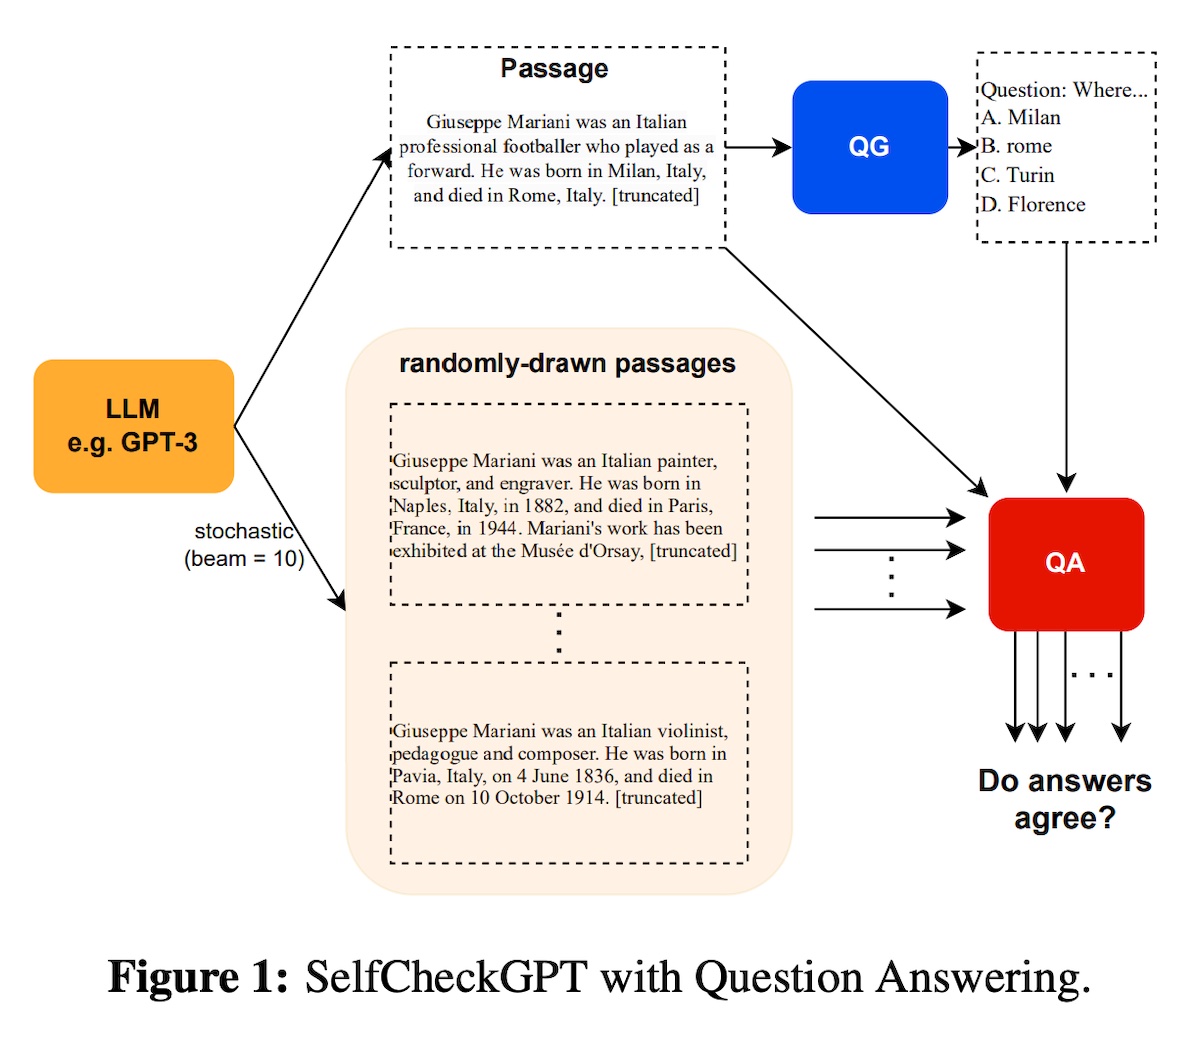 The SelfCheckGPT process